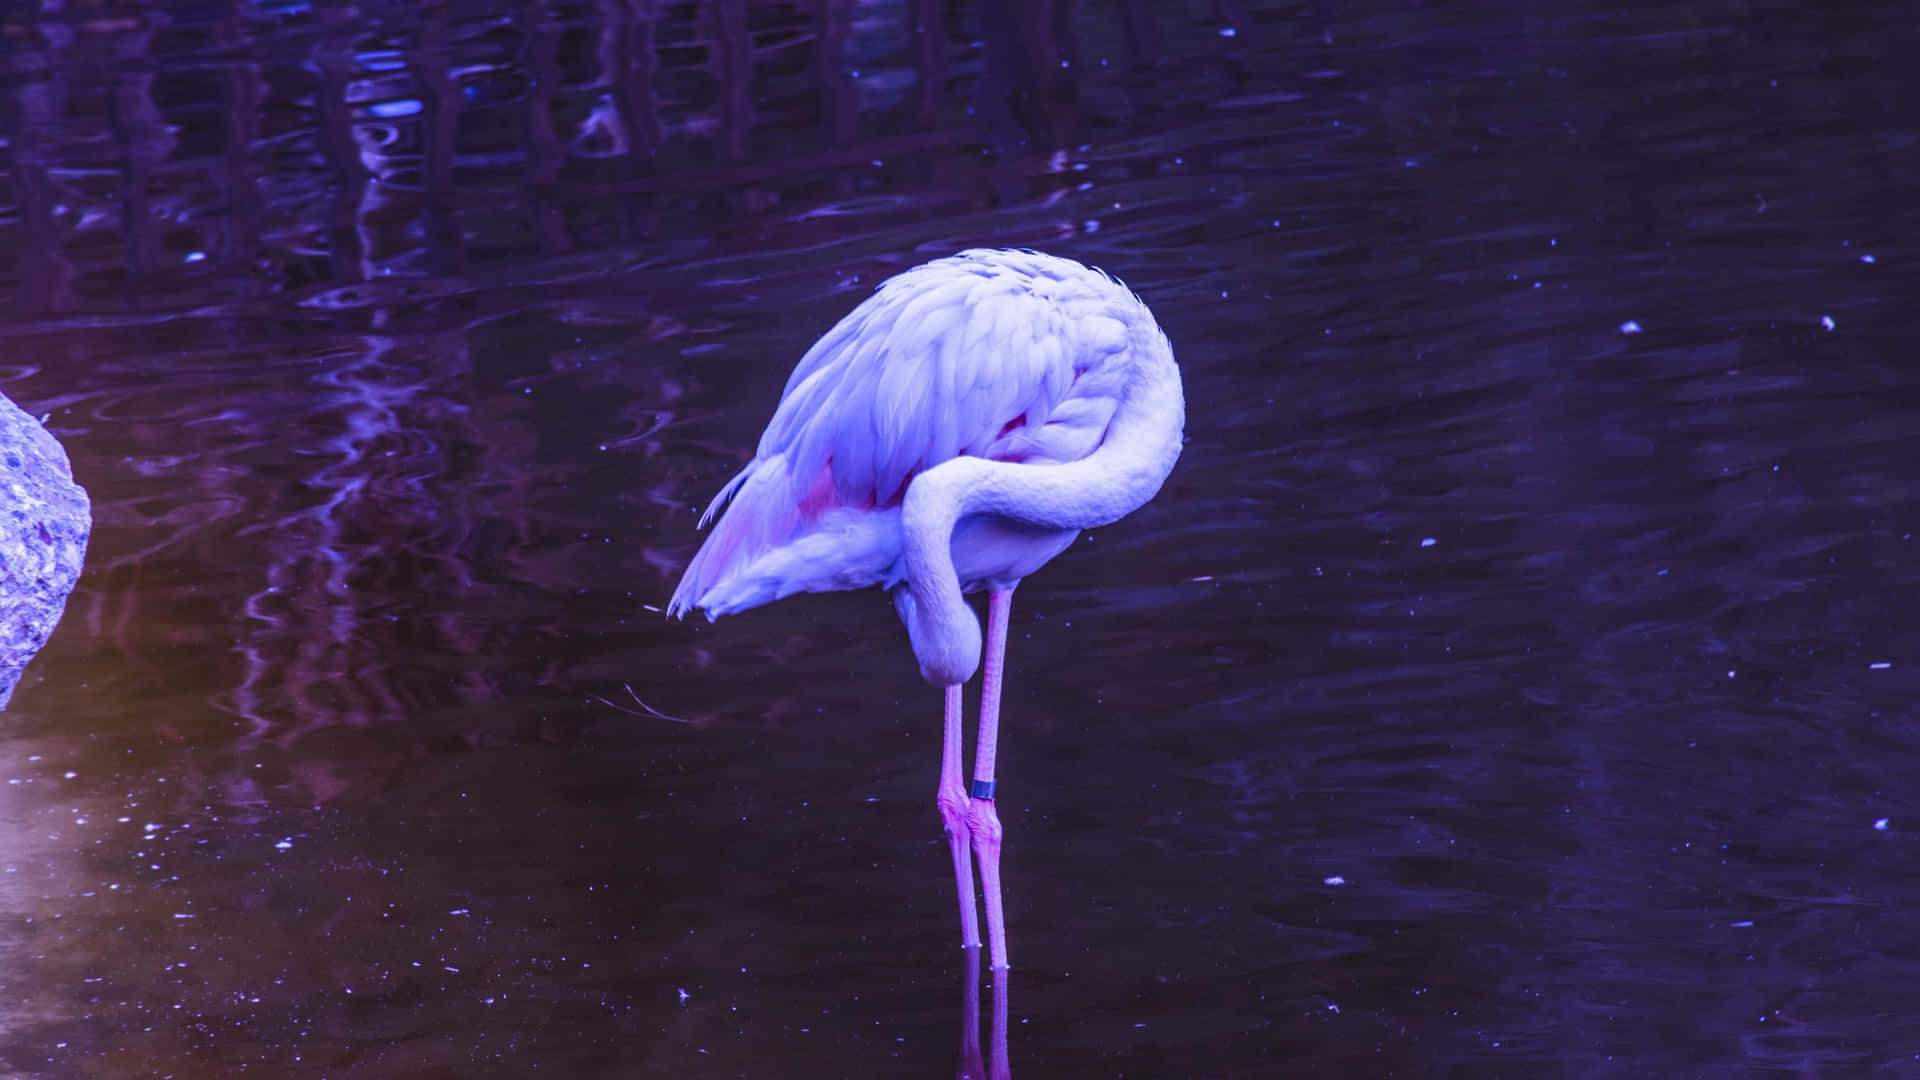 Working with Style&Flair - Flamingo Laptop Wallpaper